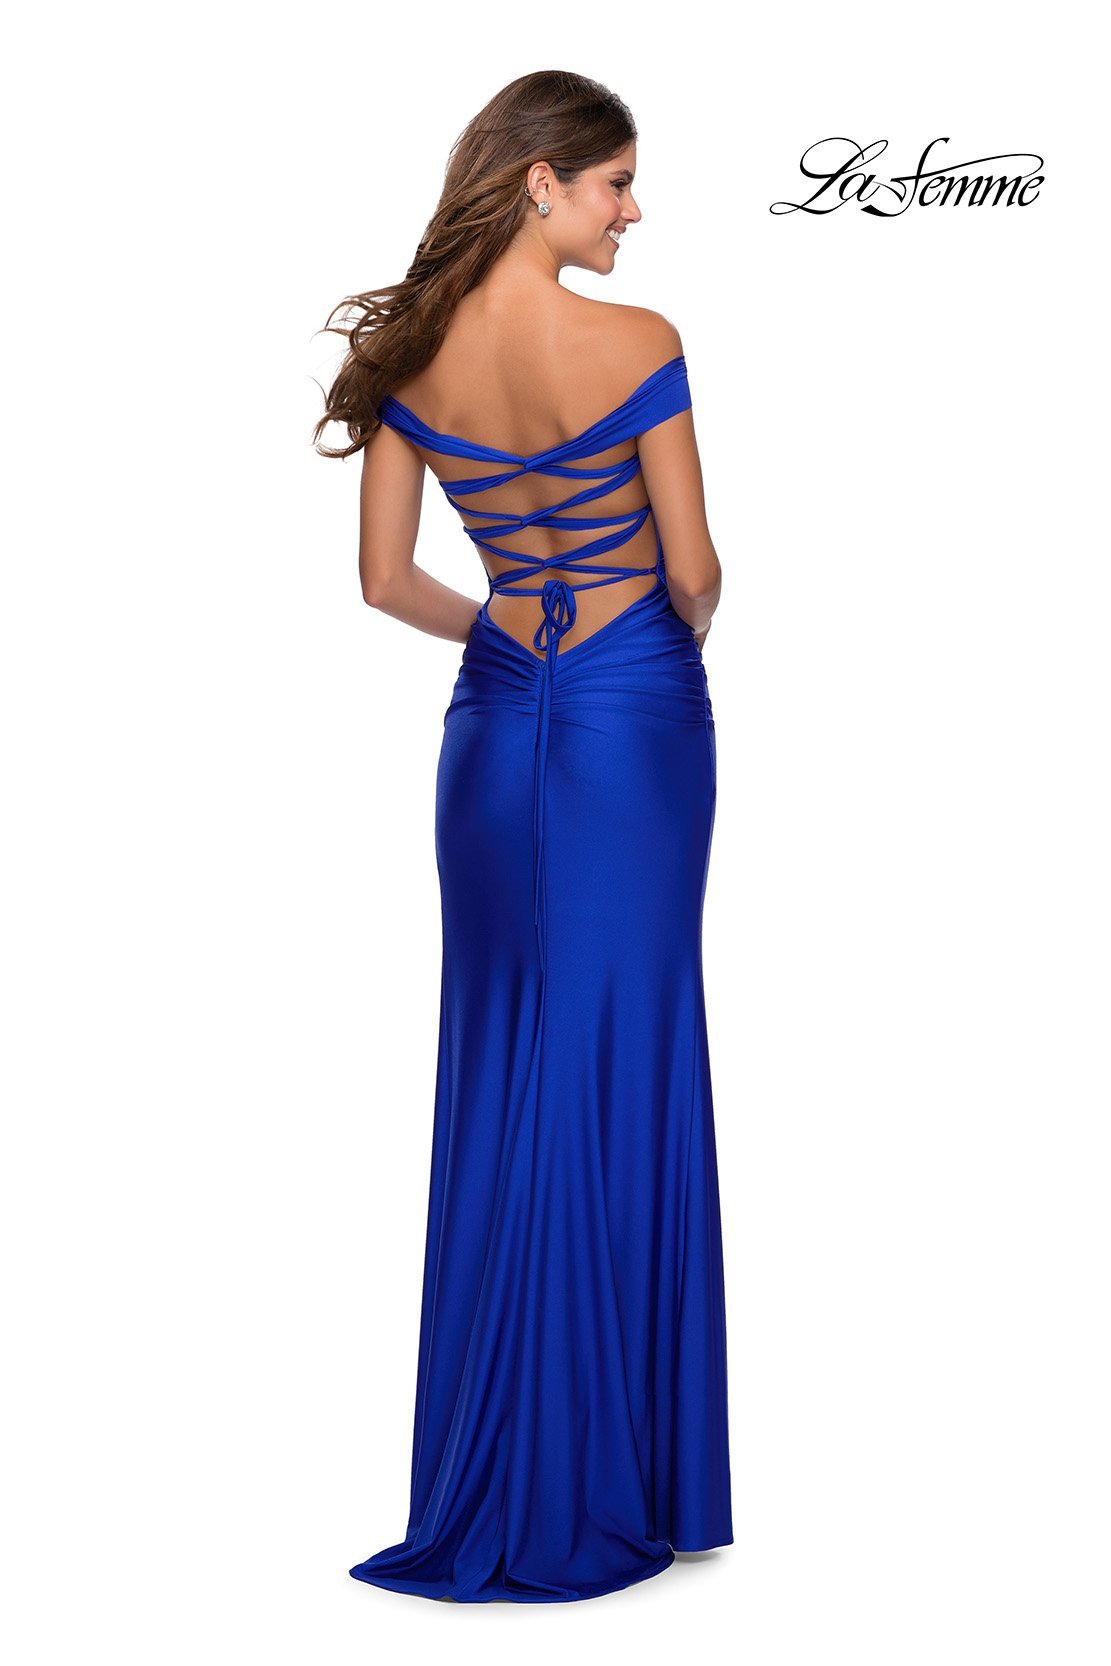 La Femme 28506 dress images in these colors: Black, Dark Berry, Hot Pink, Mauve, Royal Blue, Yellow.